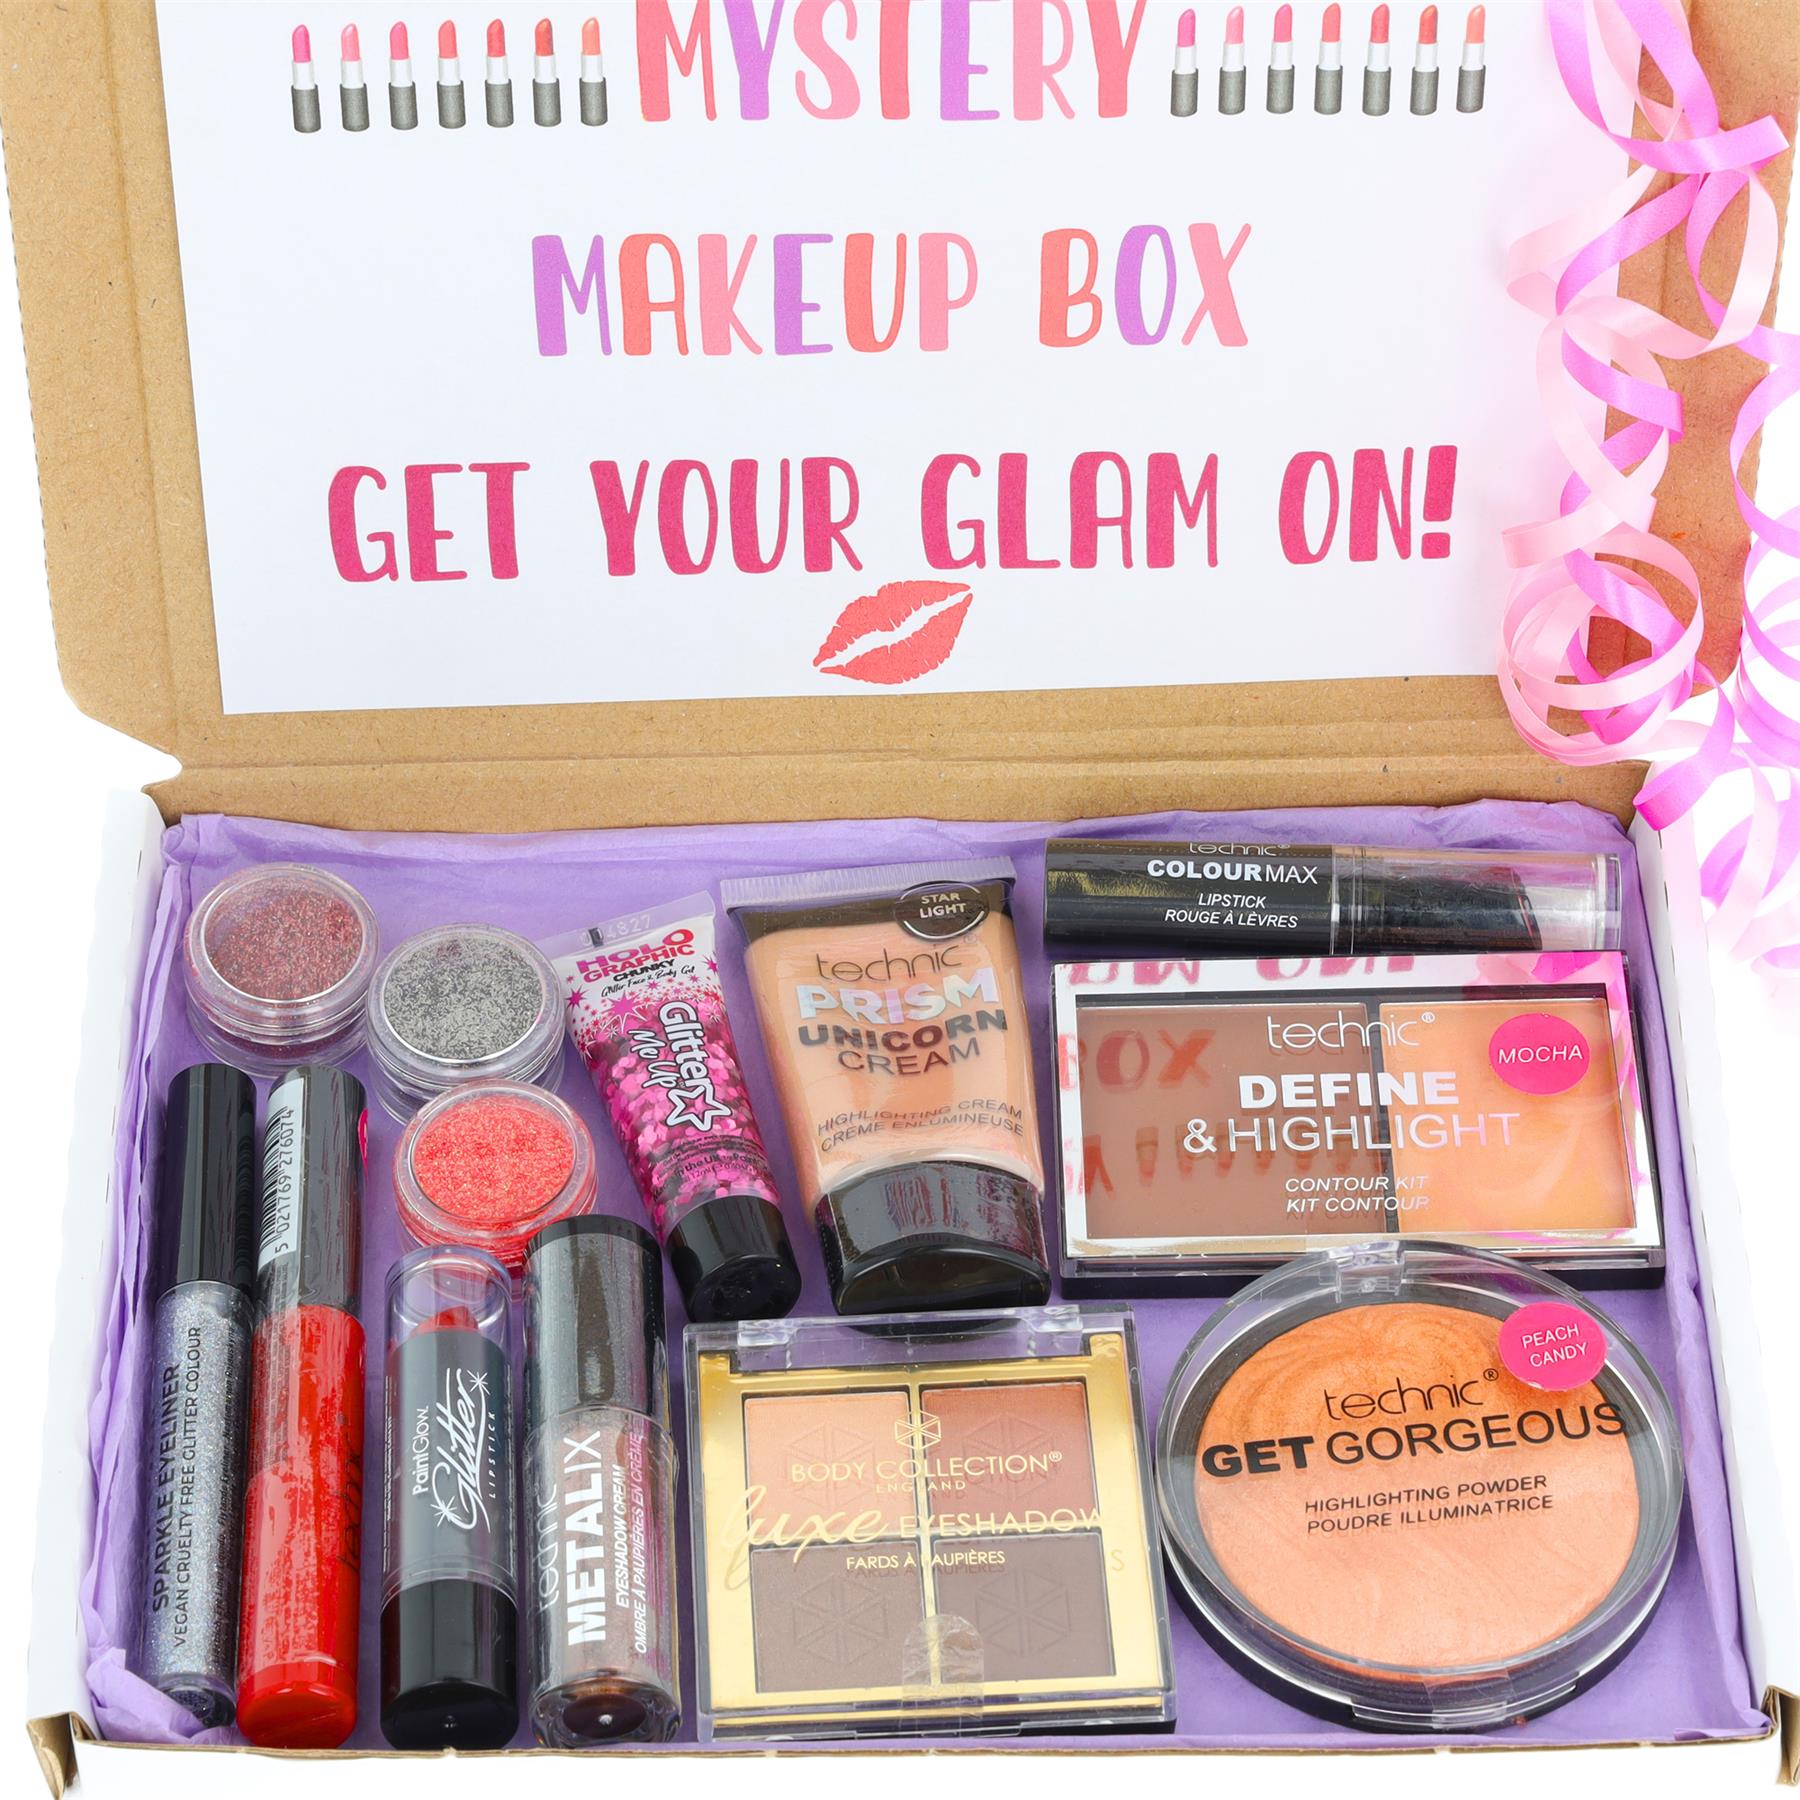 Mystery Lucky Dip Beauty Makeup Cosmetics Gift Box  - Always Looking Good -   